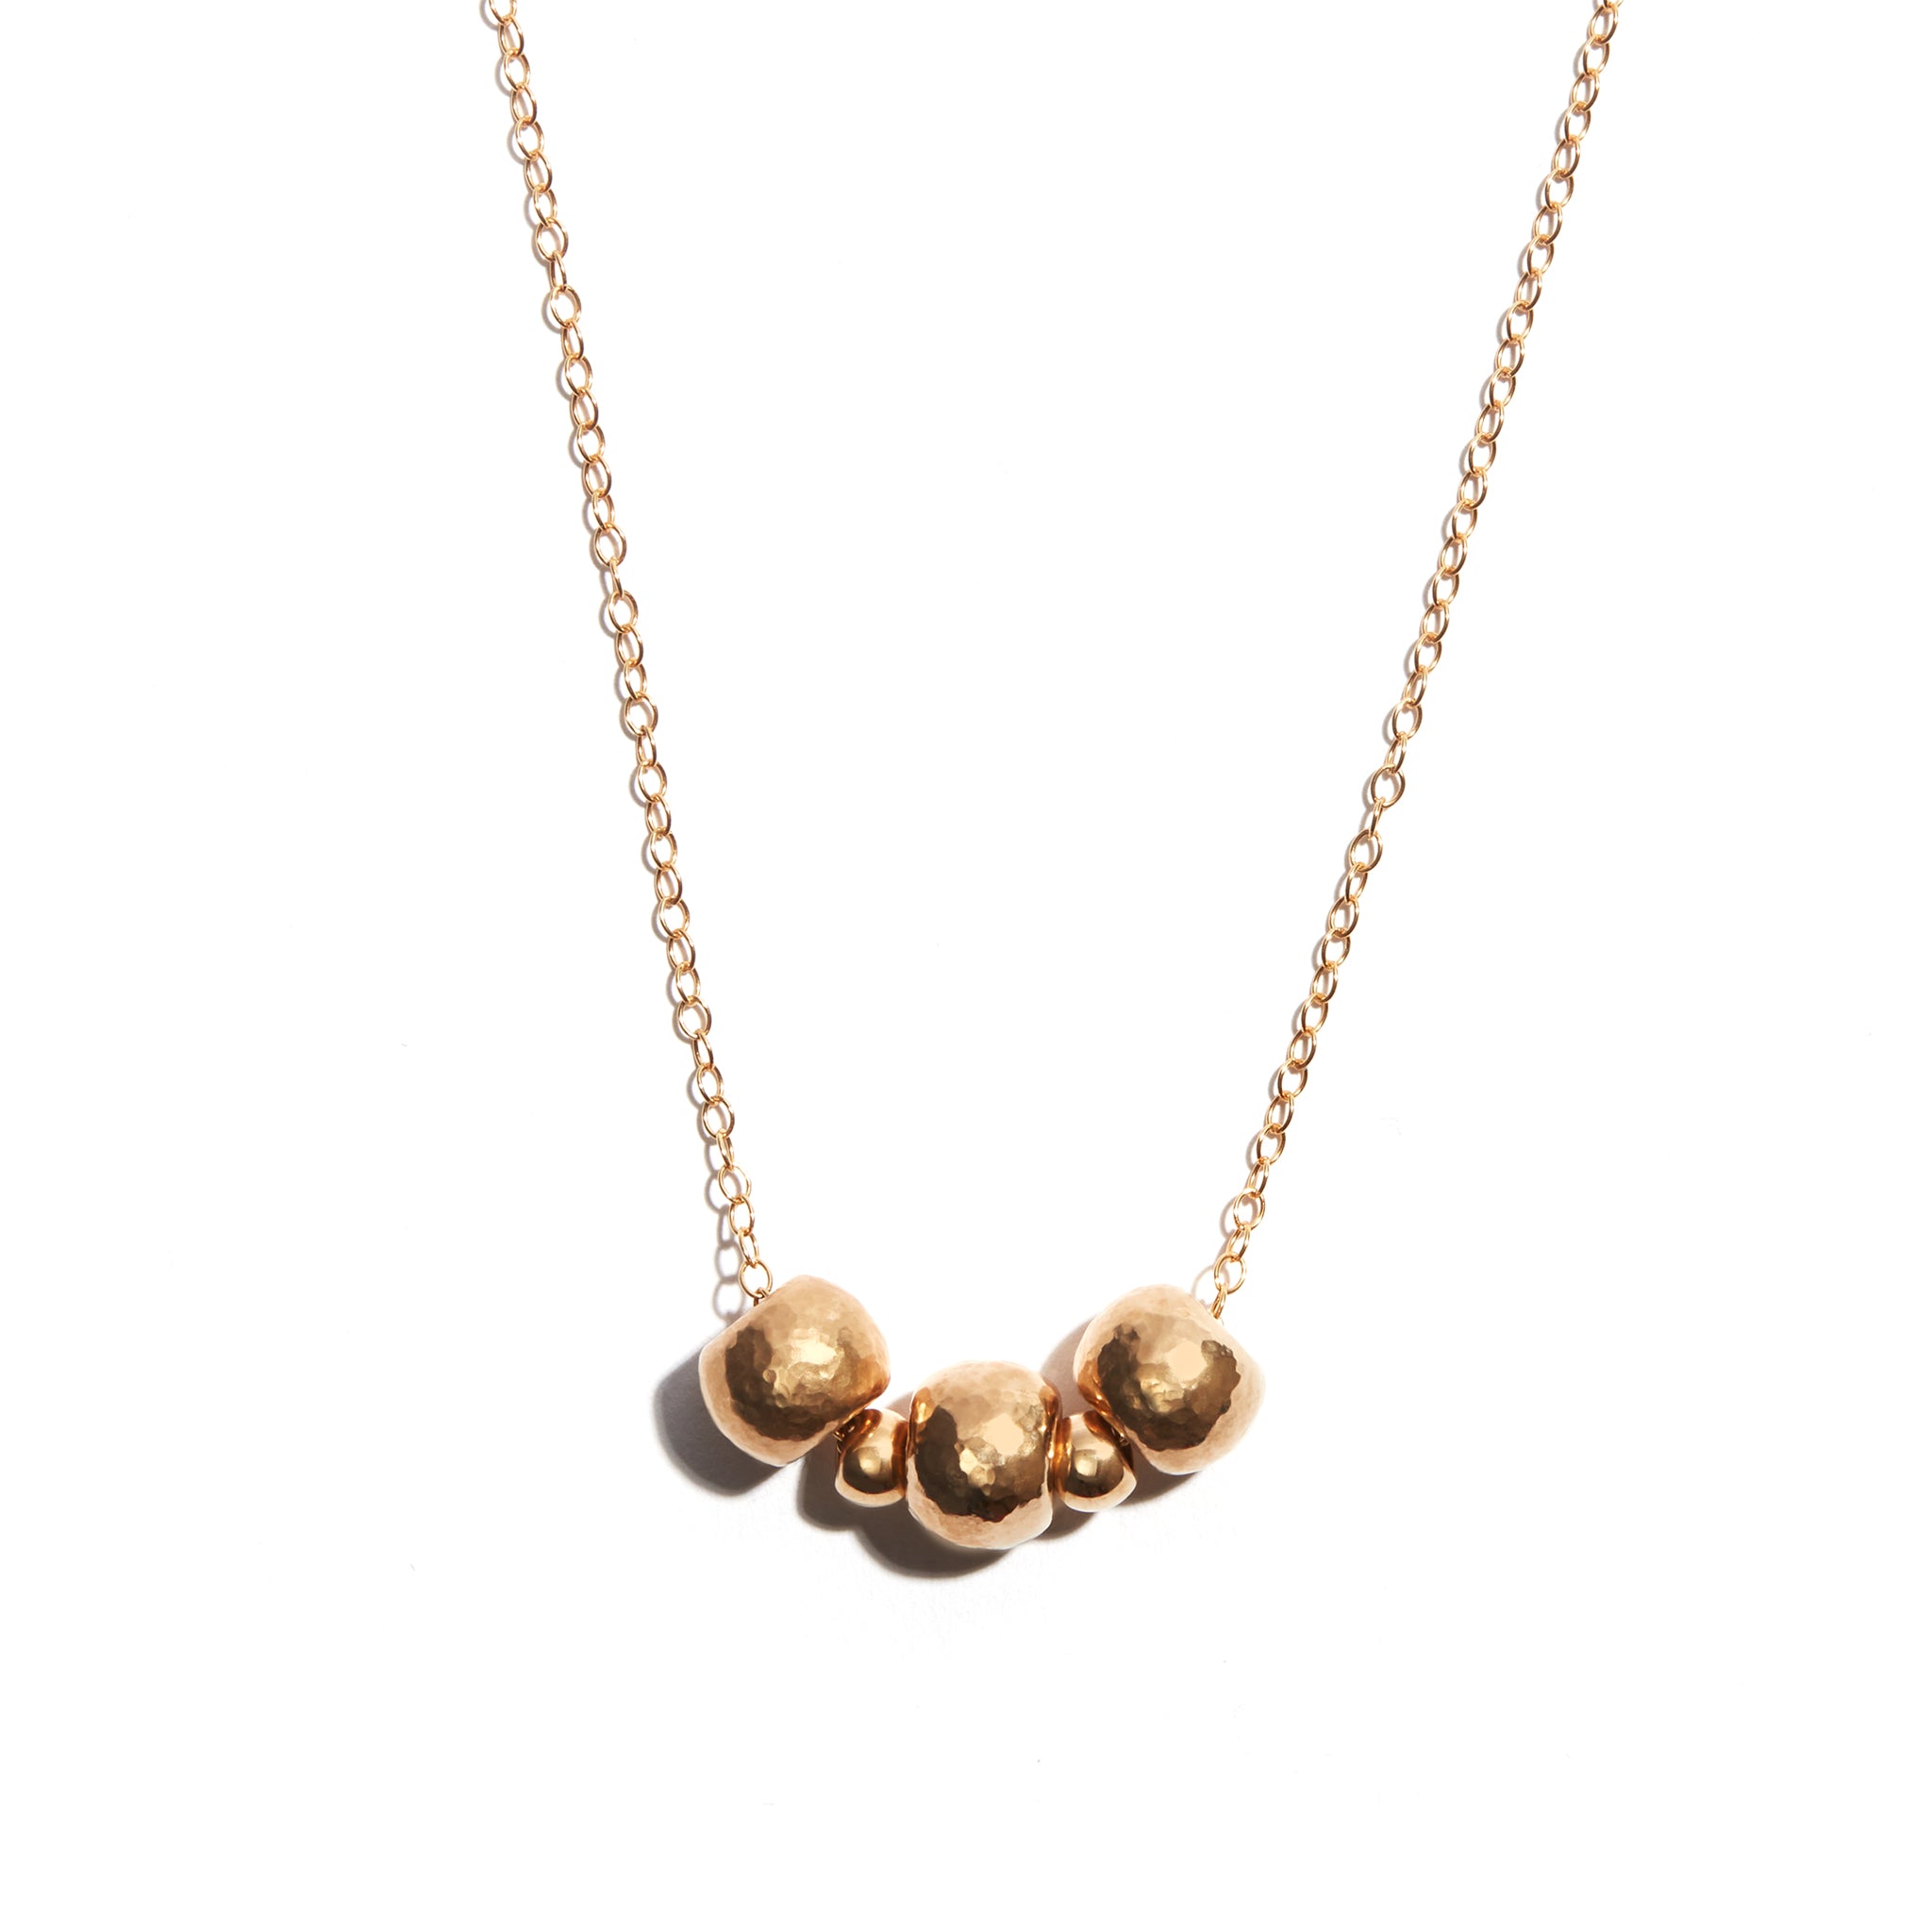 Stunning Three Balls Pendant crafted from 14 carat gold-fill, radiating timeless sophistication and charm.